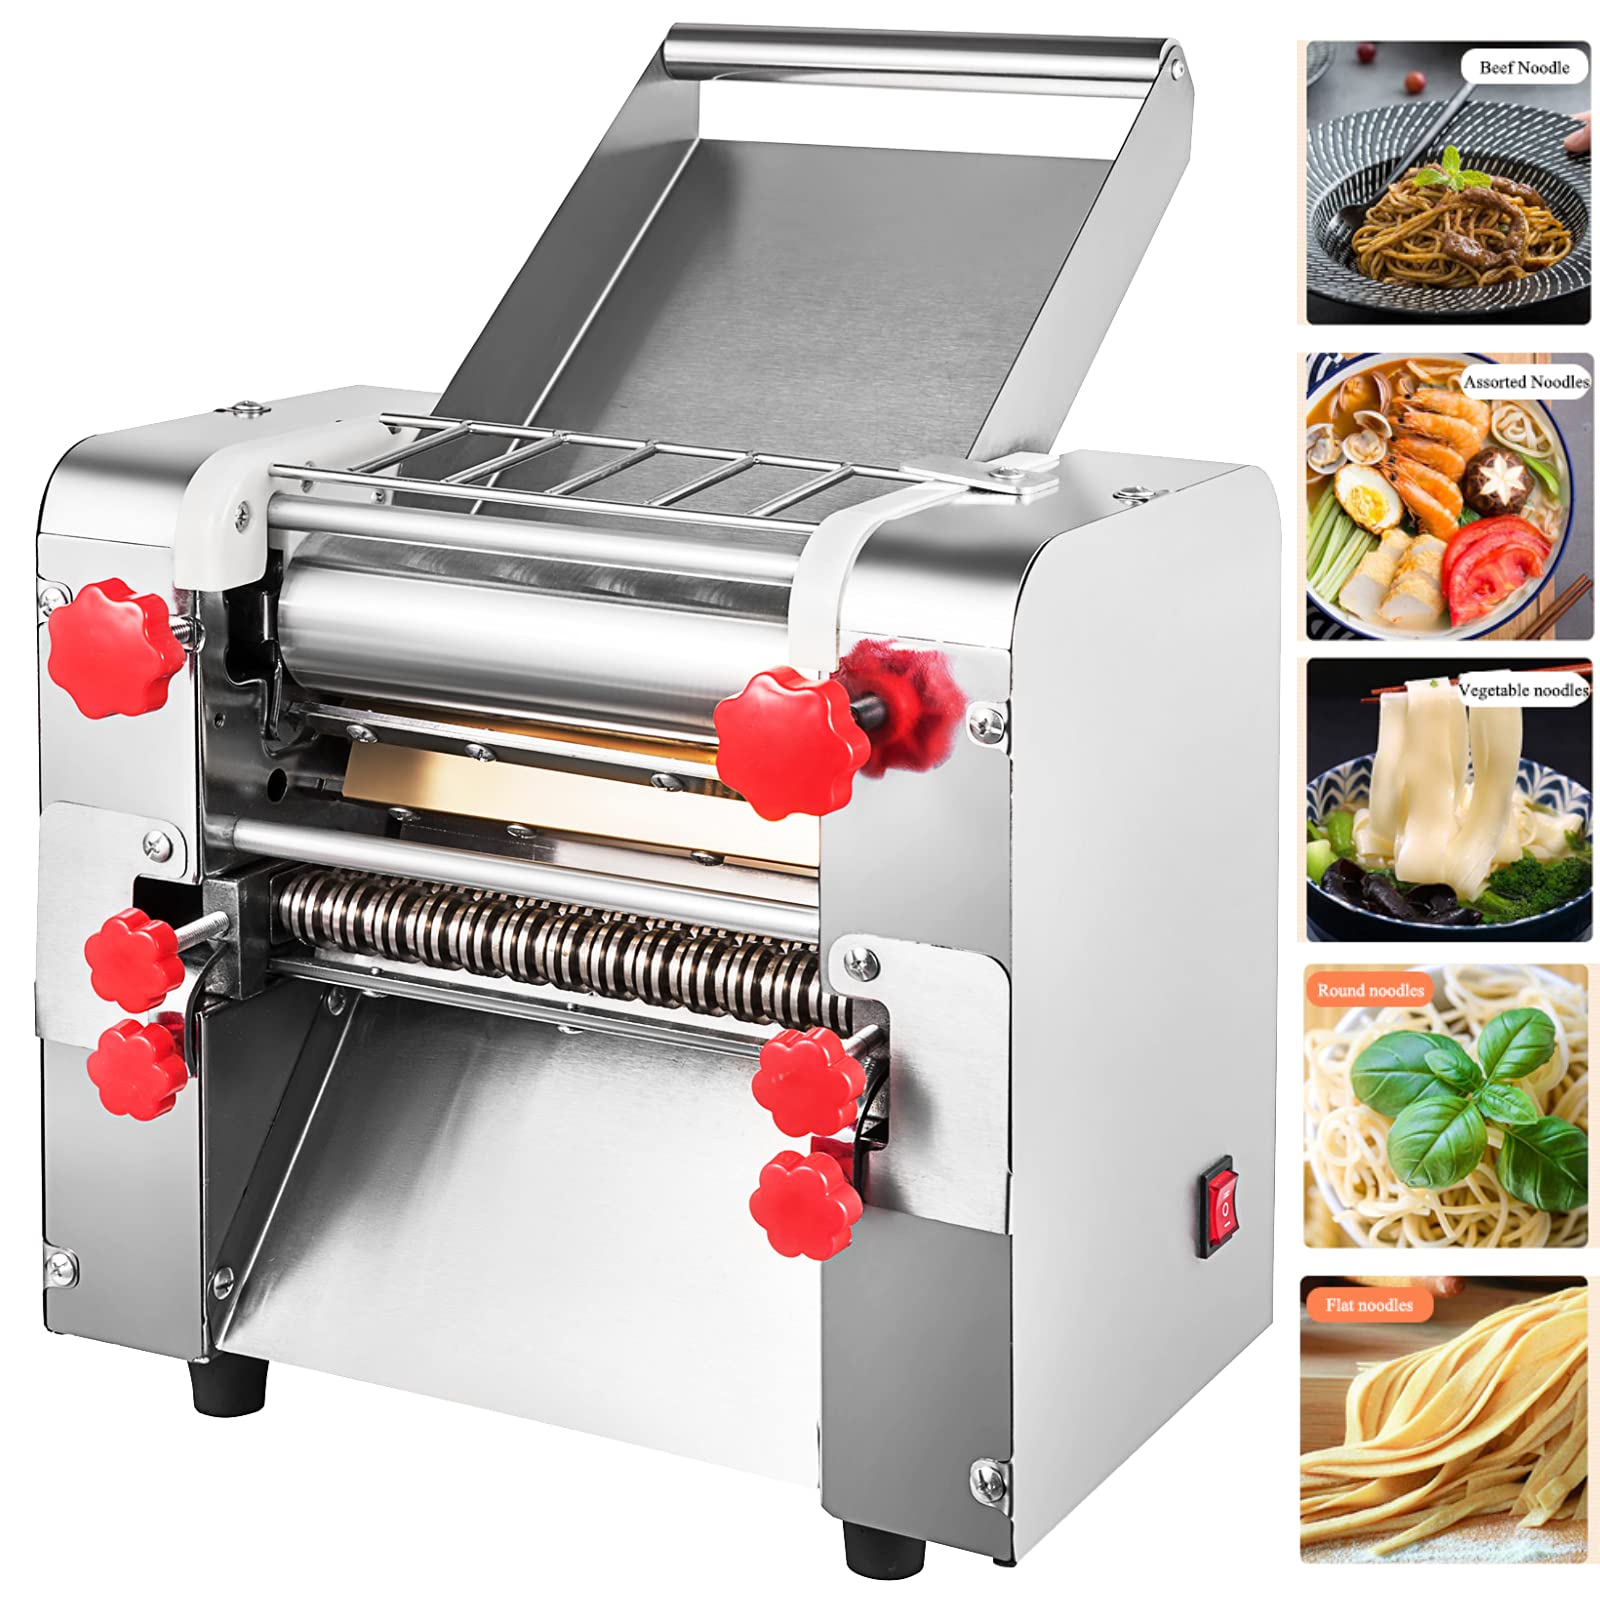 High Power Electric Commercial Spaghetti Making Machine Stainless Steel 70Lbs/H Automatic Multifunctional Pressing Noodle Machine for Pasta Dumplings Lasagna, Linguini (Noodle 3/9mm) - Commercial Using Noodel Machine - 1